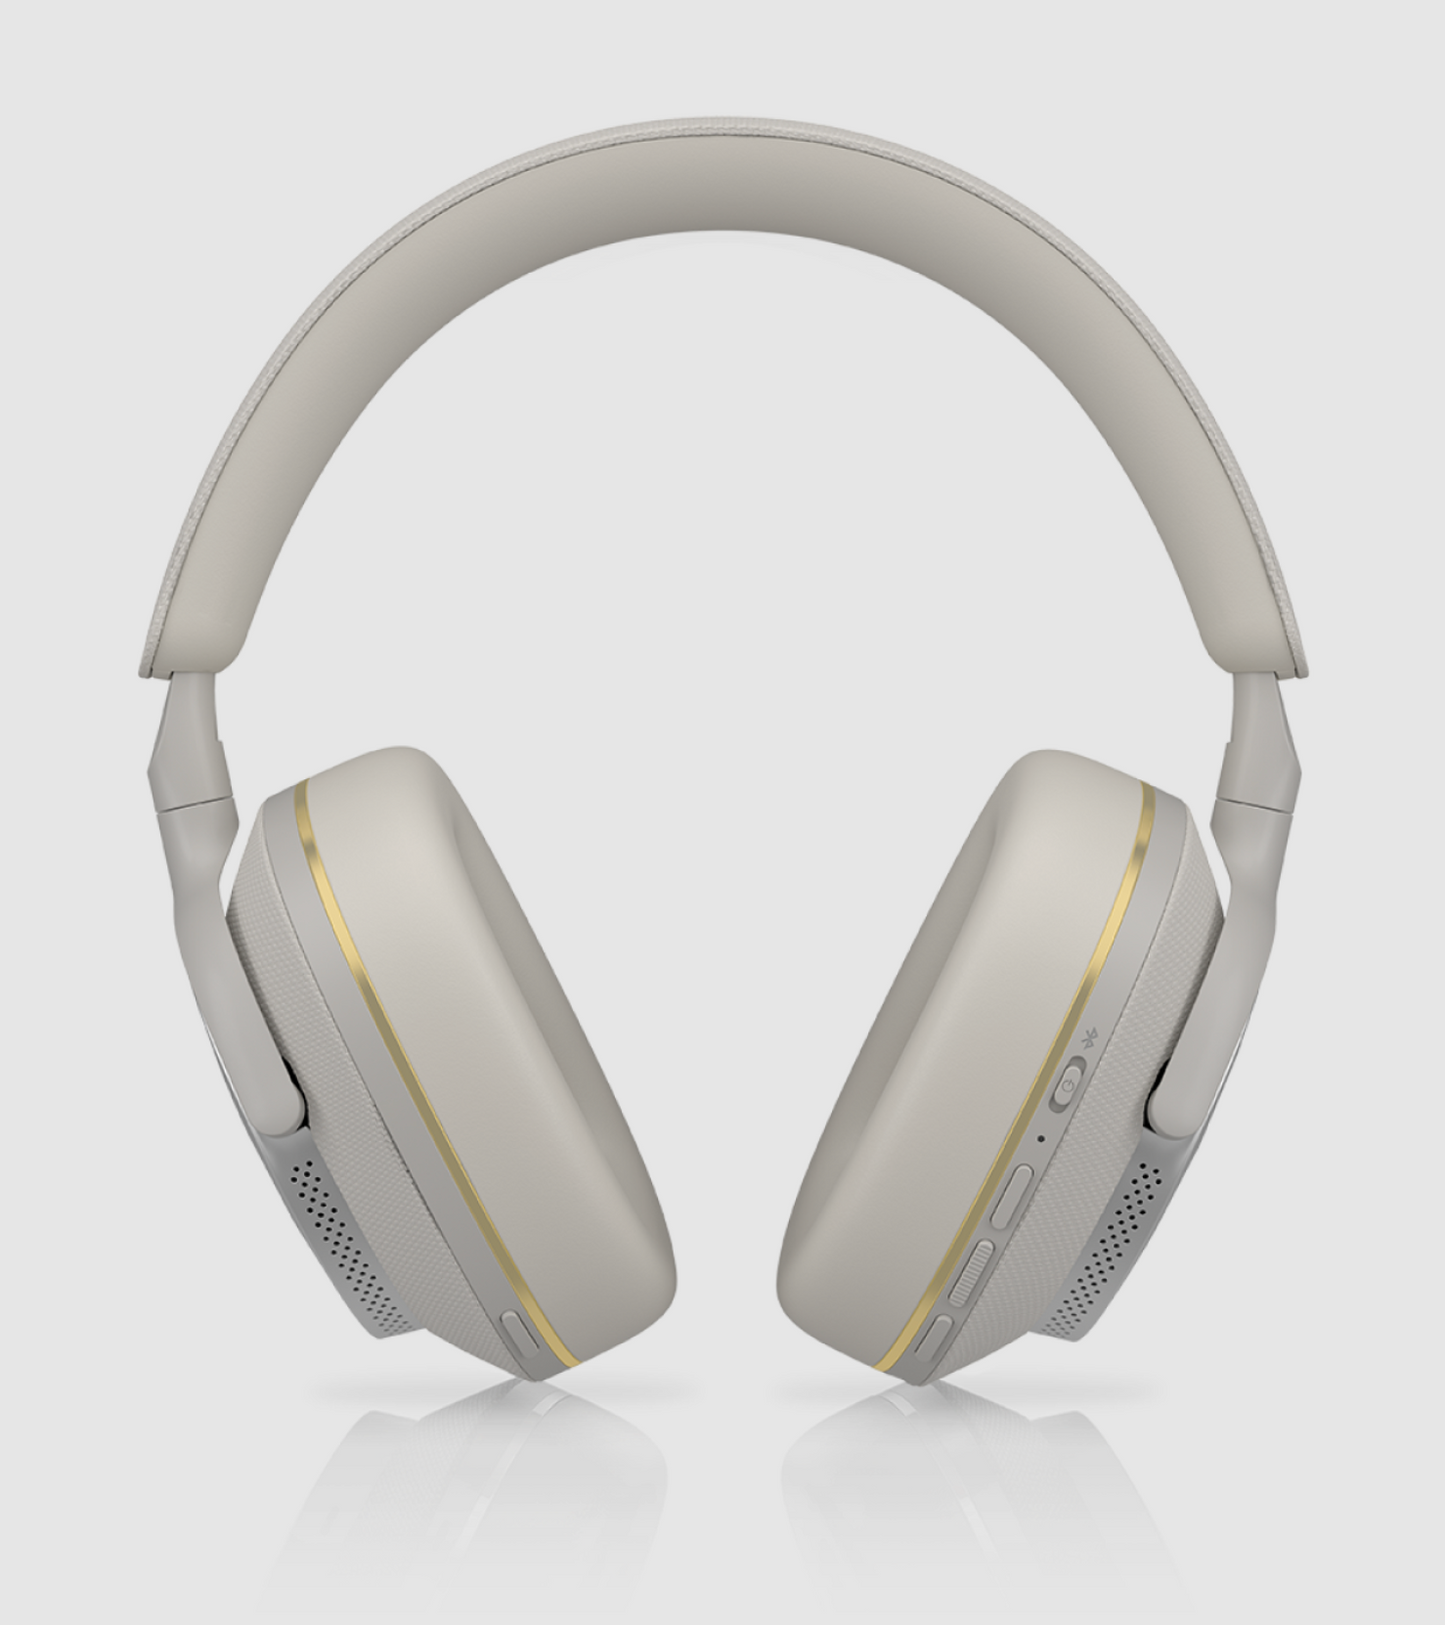 B&W Px7 S2e Noise Cancelling Headphones in Cloud Gray.  Image shows controls